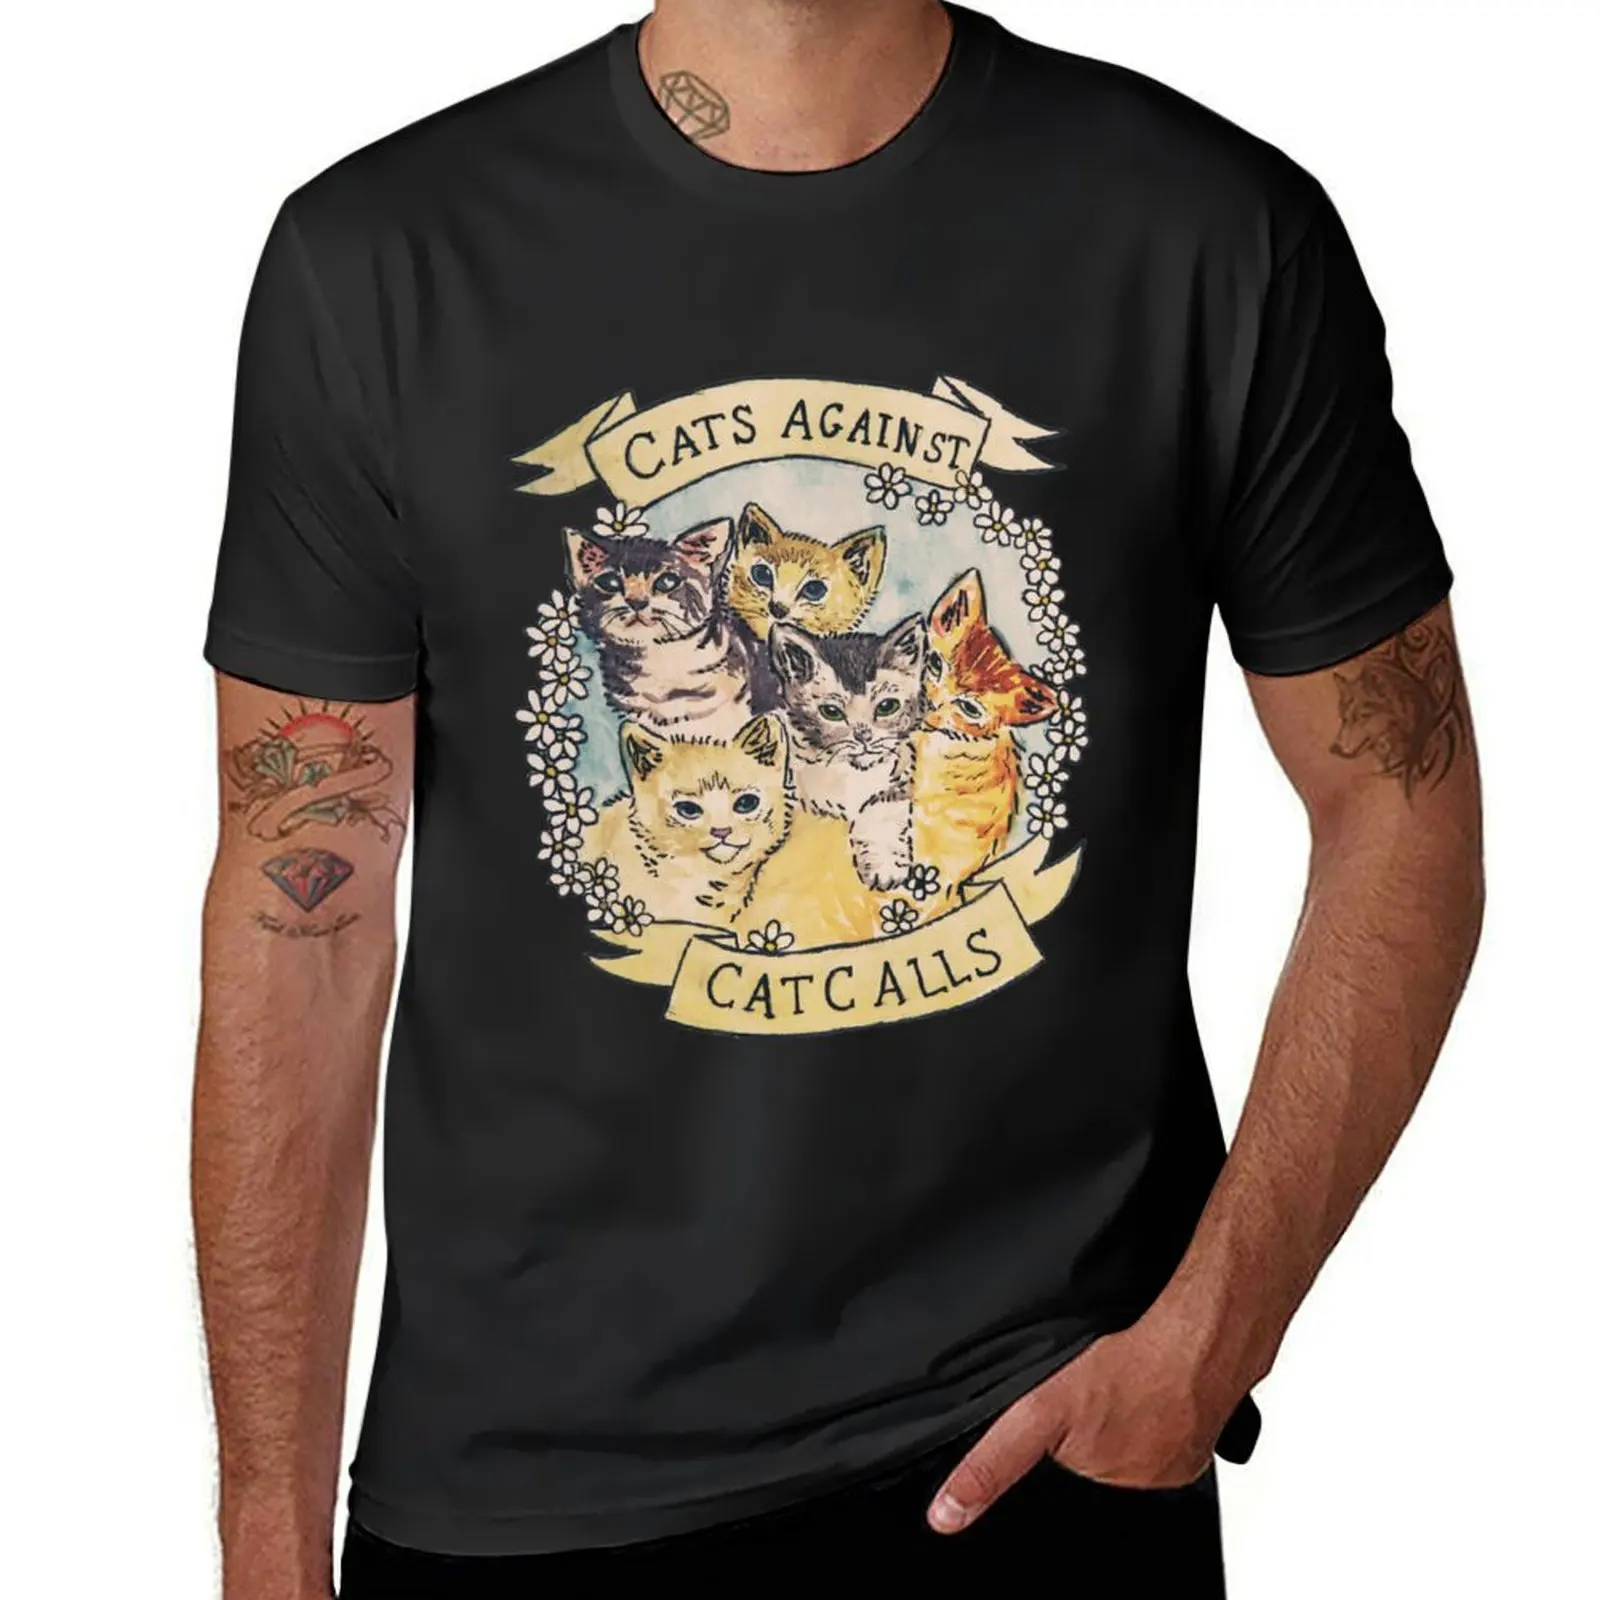 

Cats Against Cat Calls ORIGINAL (SEE V2 IN MY SHOP) T-Shirt quick-drying aesthetic clothes mens big and tall t shirts